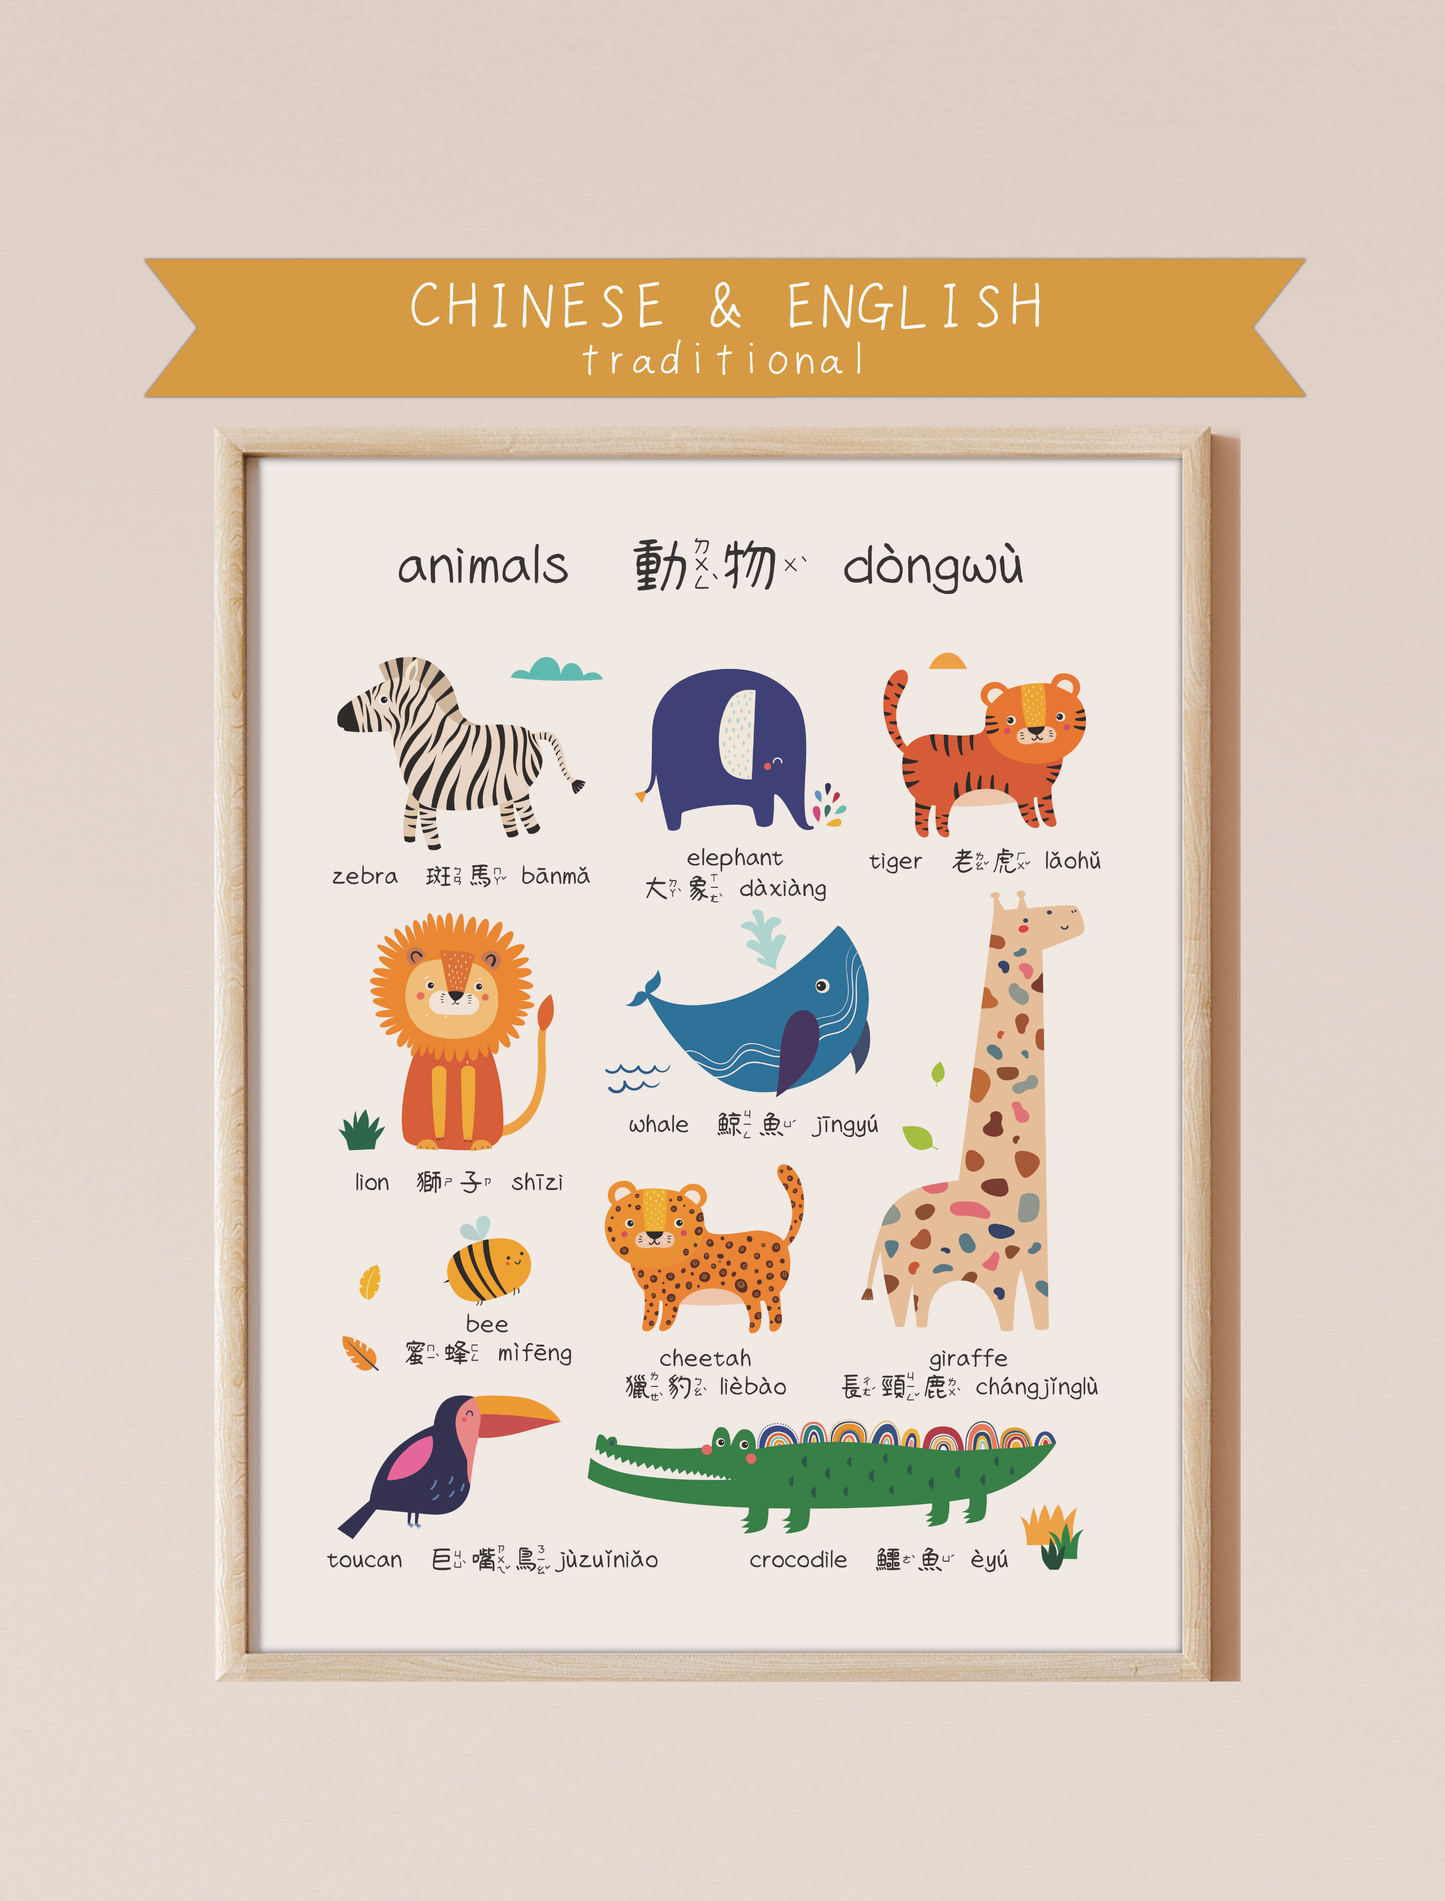 A bilingual educational print featuring animals labeled in English and Chinese. The print displays cute, colorful illustrations of the following animals: zebra, elephant, tiger, lion, whale, bee, cheetah, giraffe toucan, and crocodile . This bilingual display aids in language acquisition and cross-cultural learning.